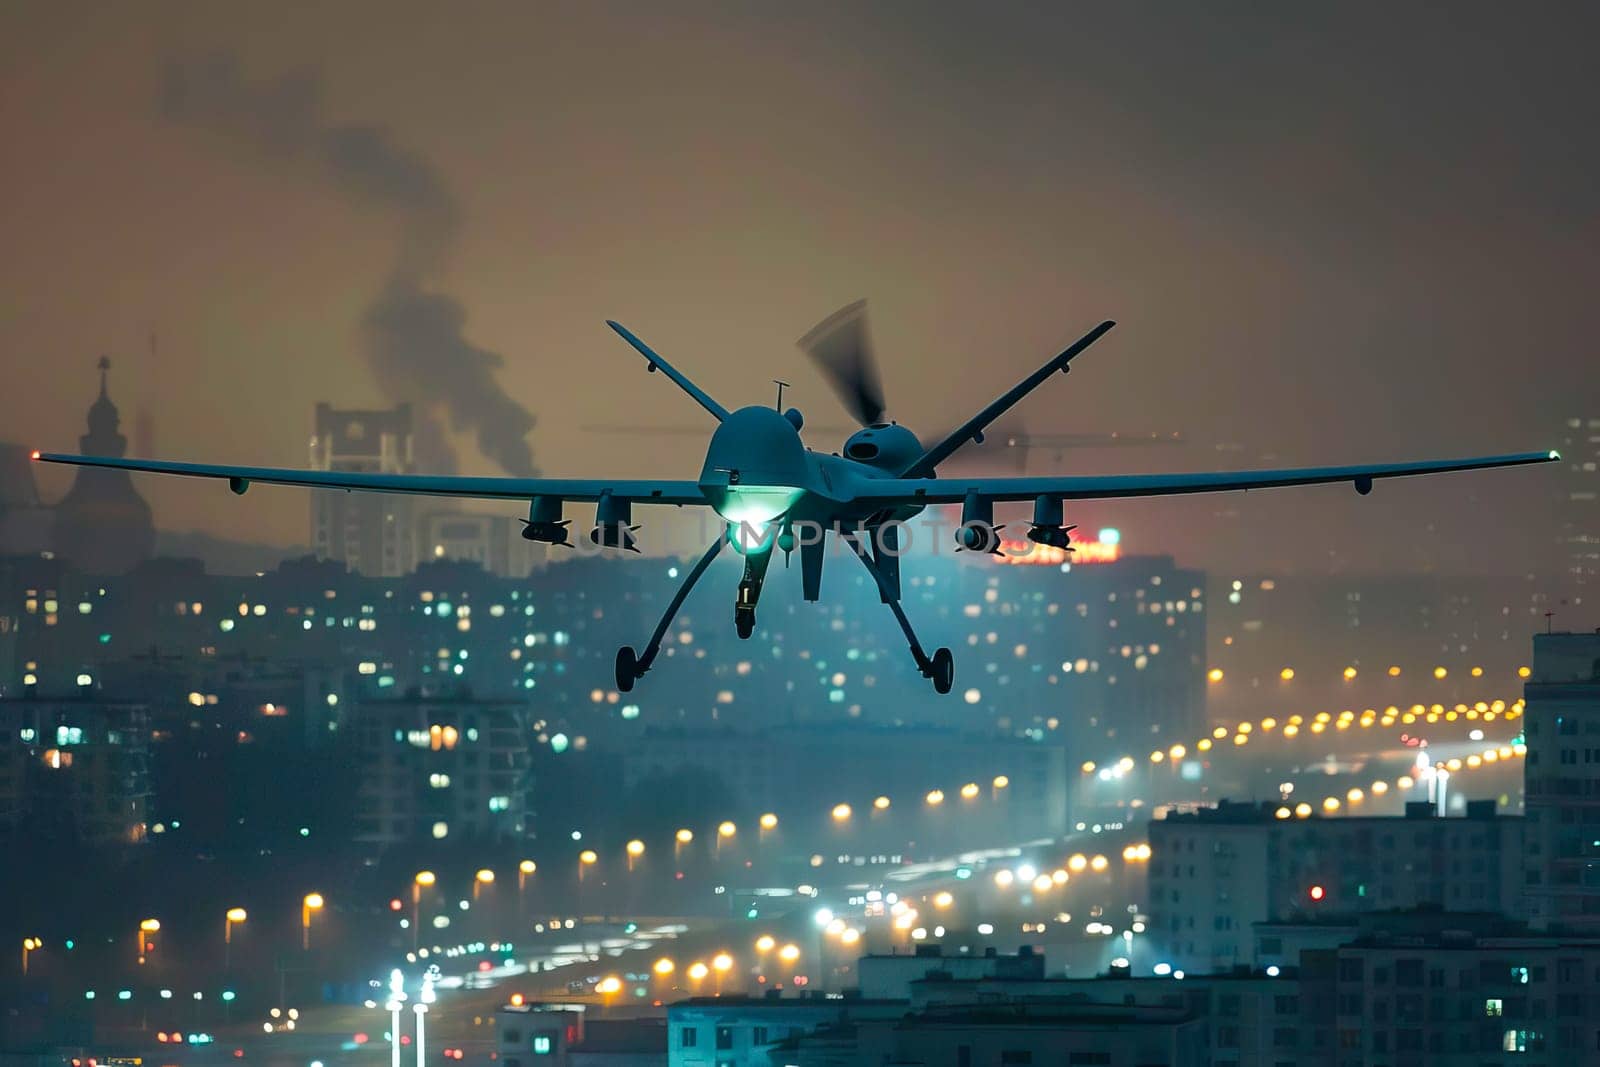 A military plane flies over a city at night, showcasing its powerful presence and surveillance capabilities. by vladimka